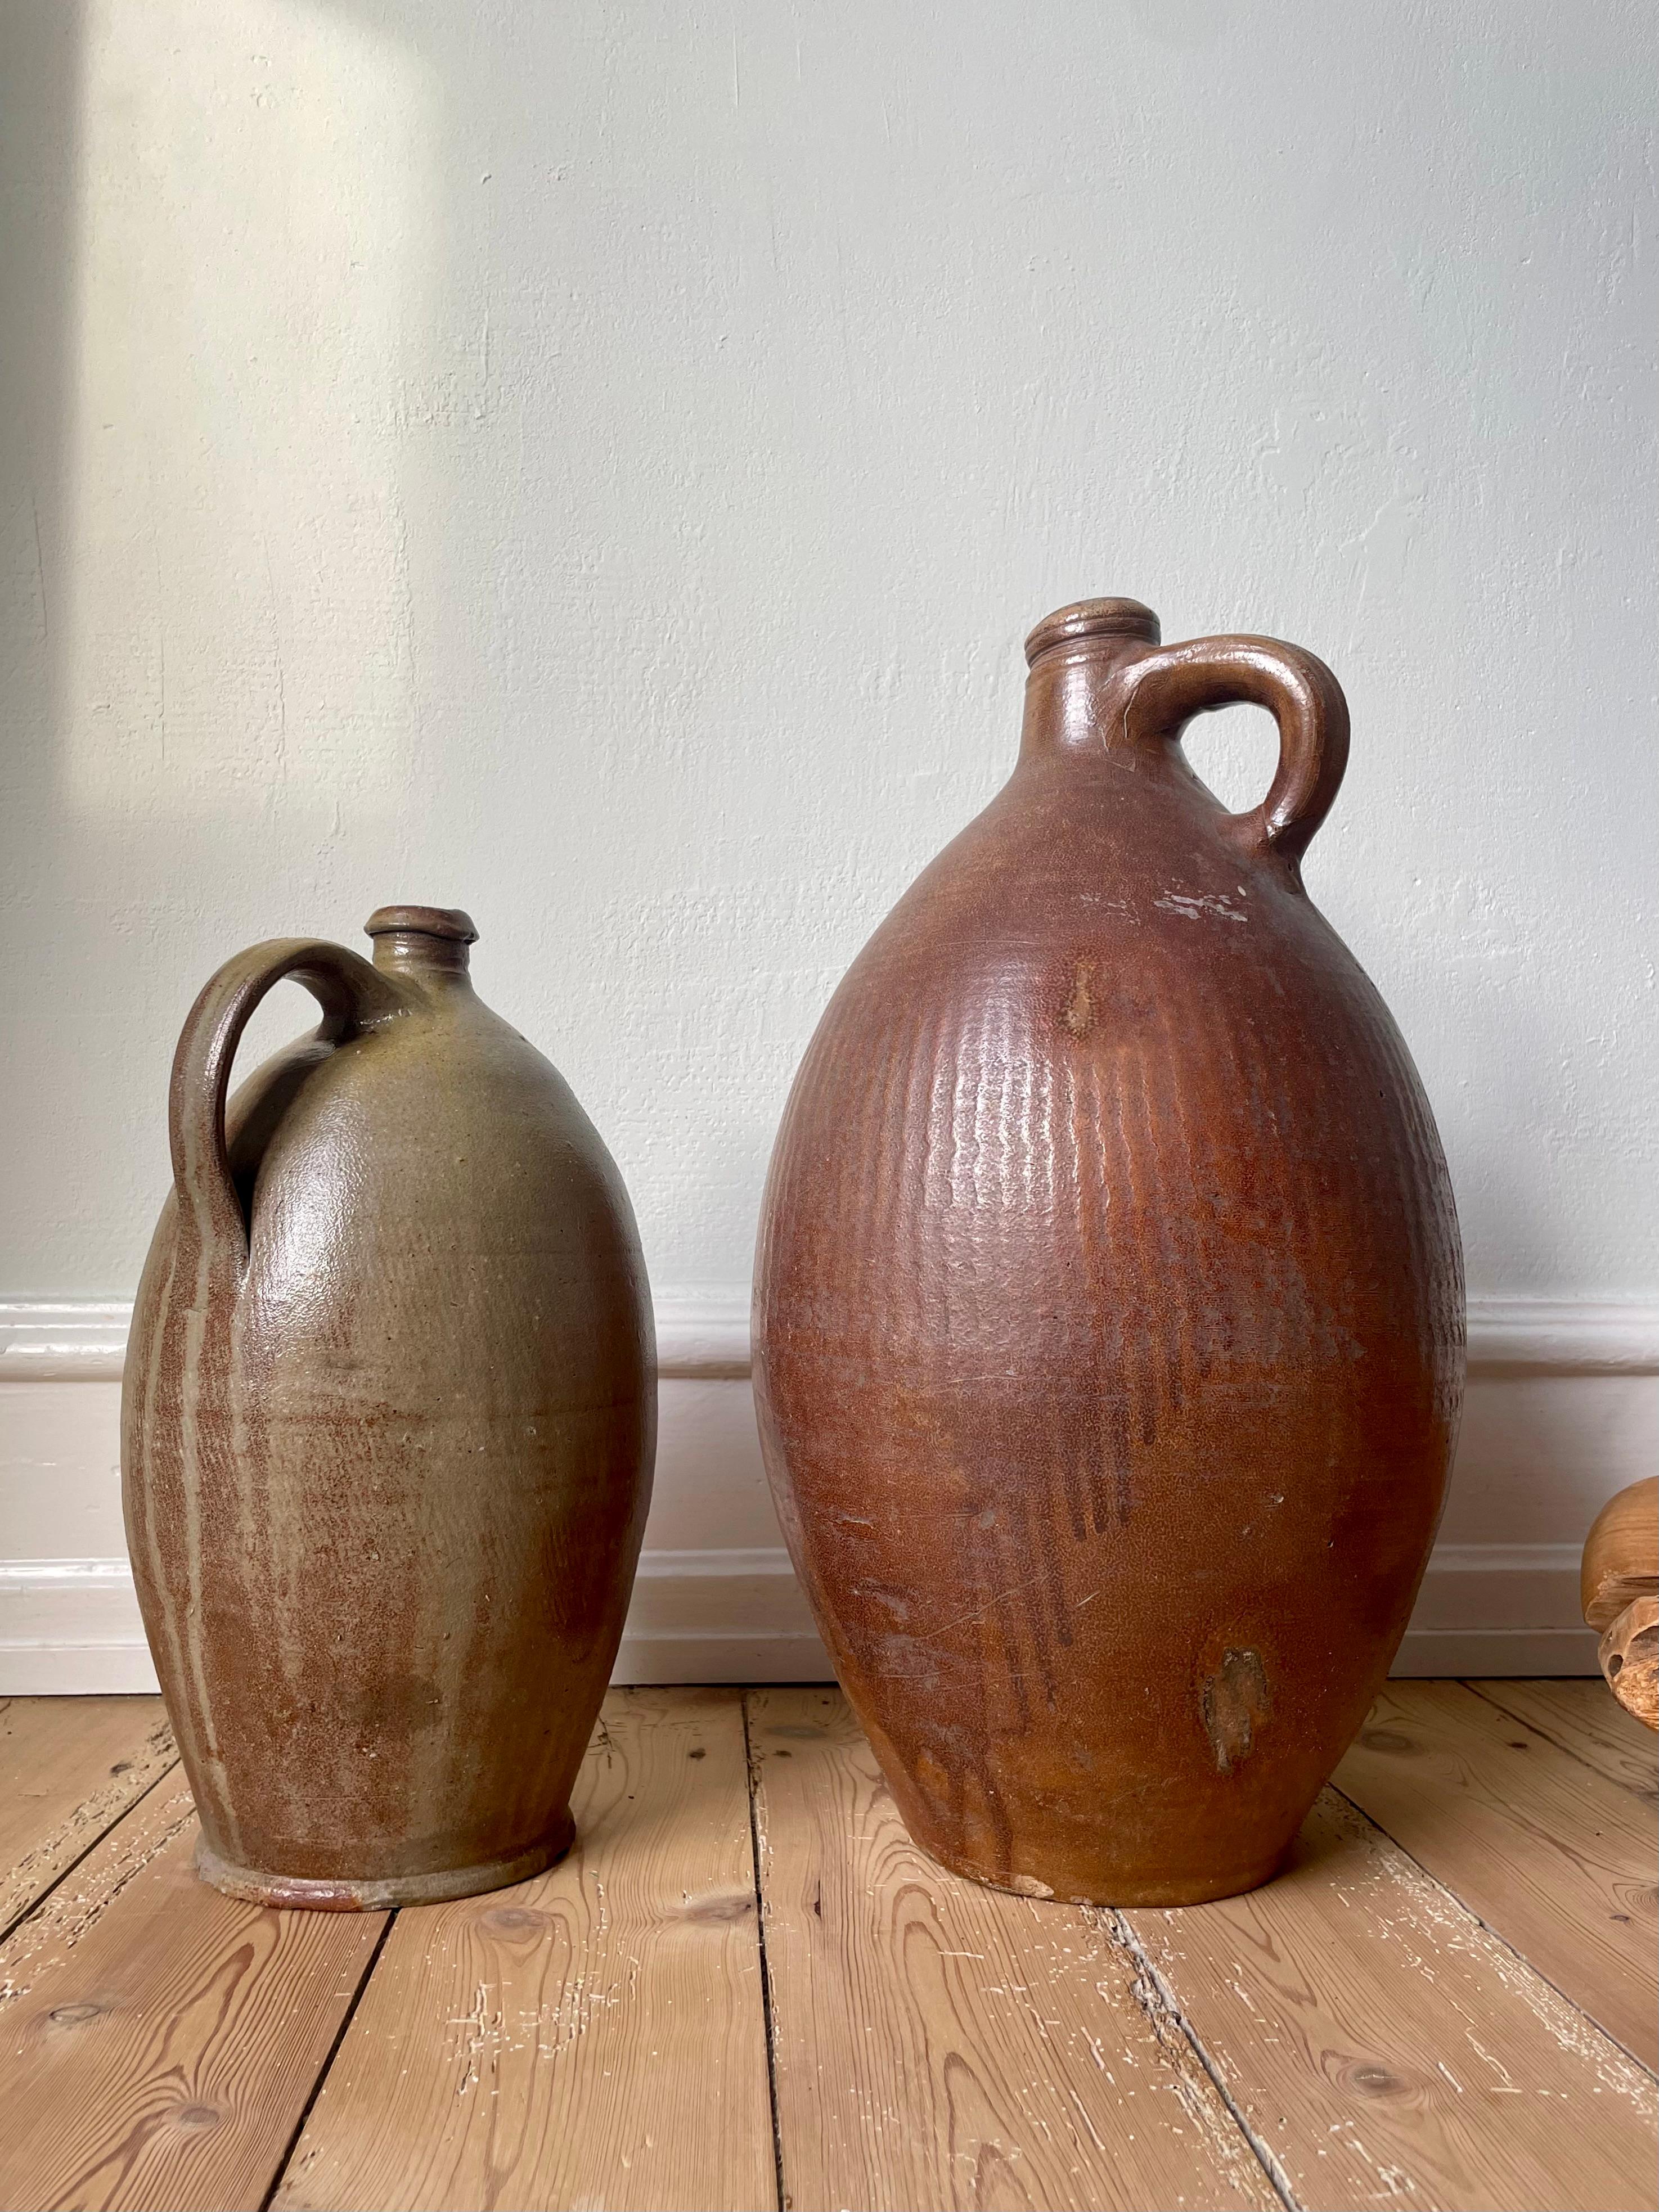 Pair of large authentic 19th century glazed terracotta pitcher bottle jugs originally used for containing water and olive oil - the smallest one still has the original cork stopper in the spout. Beautifully aged and weathered with stunning glaze in